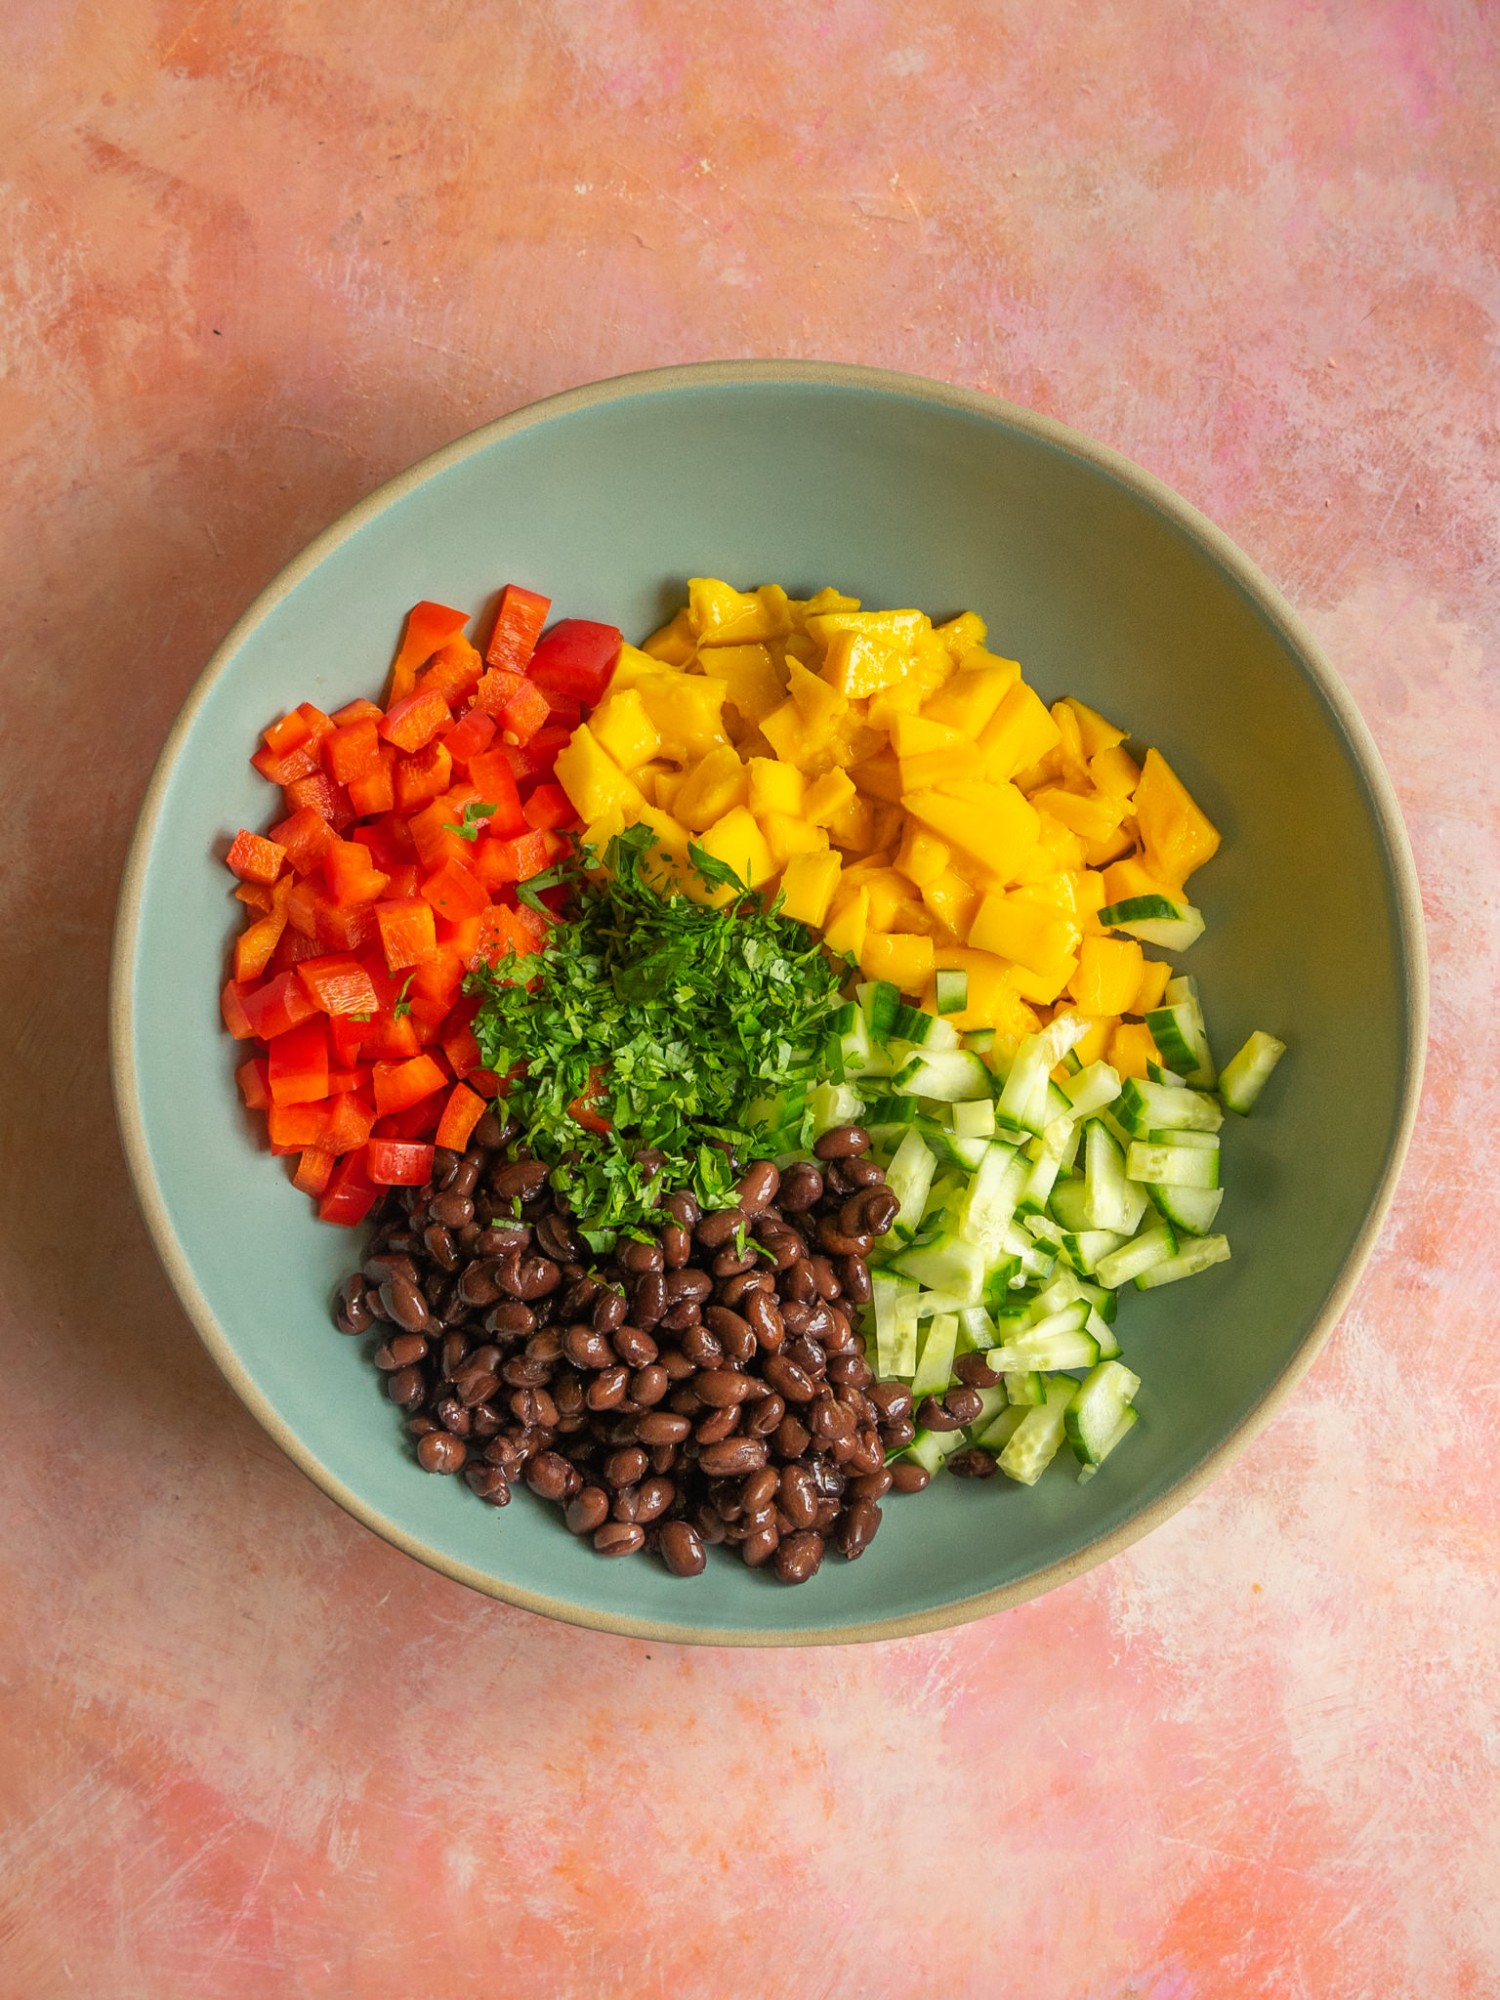 Mango and black bean salad ingredients in a mixing bowl